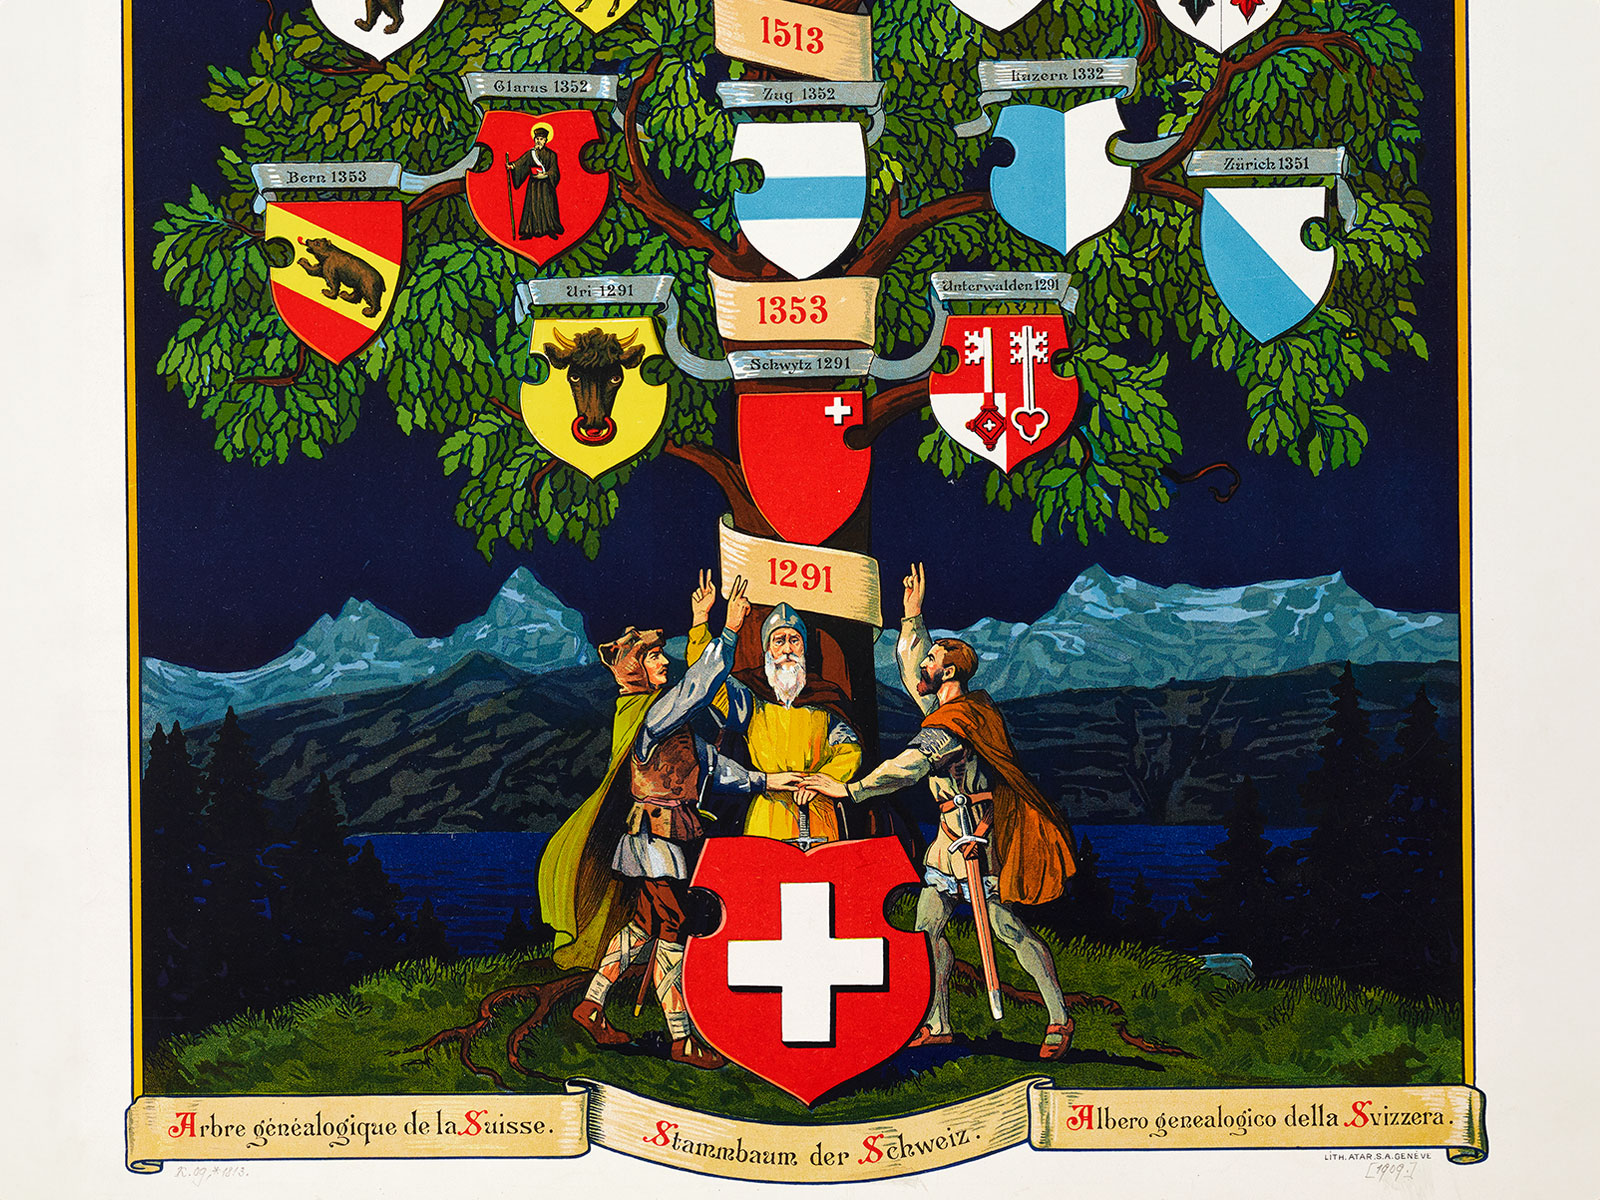 Flag of Switzerland (A) and symbol of the Red Cross (B). The design of